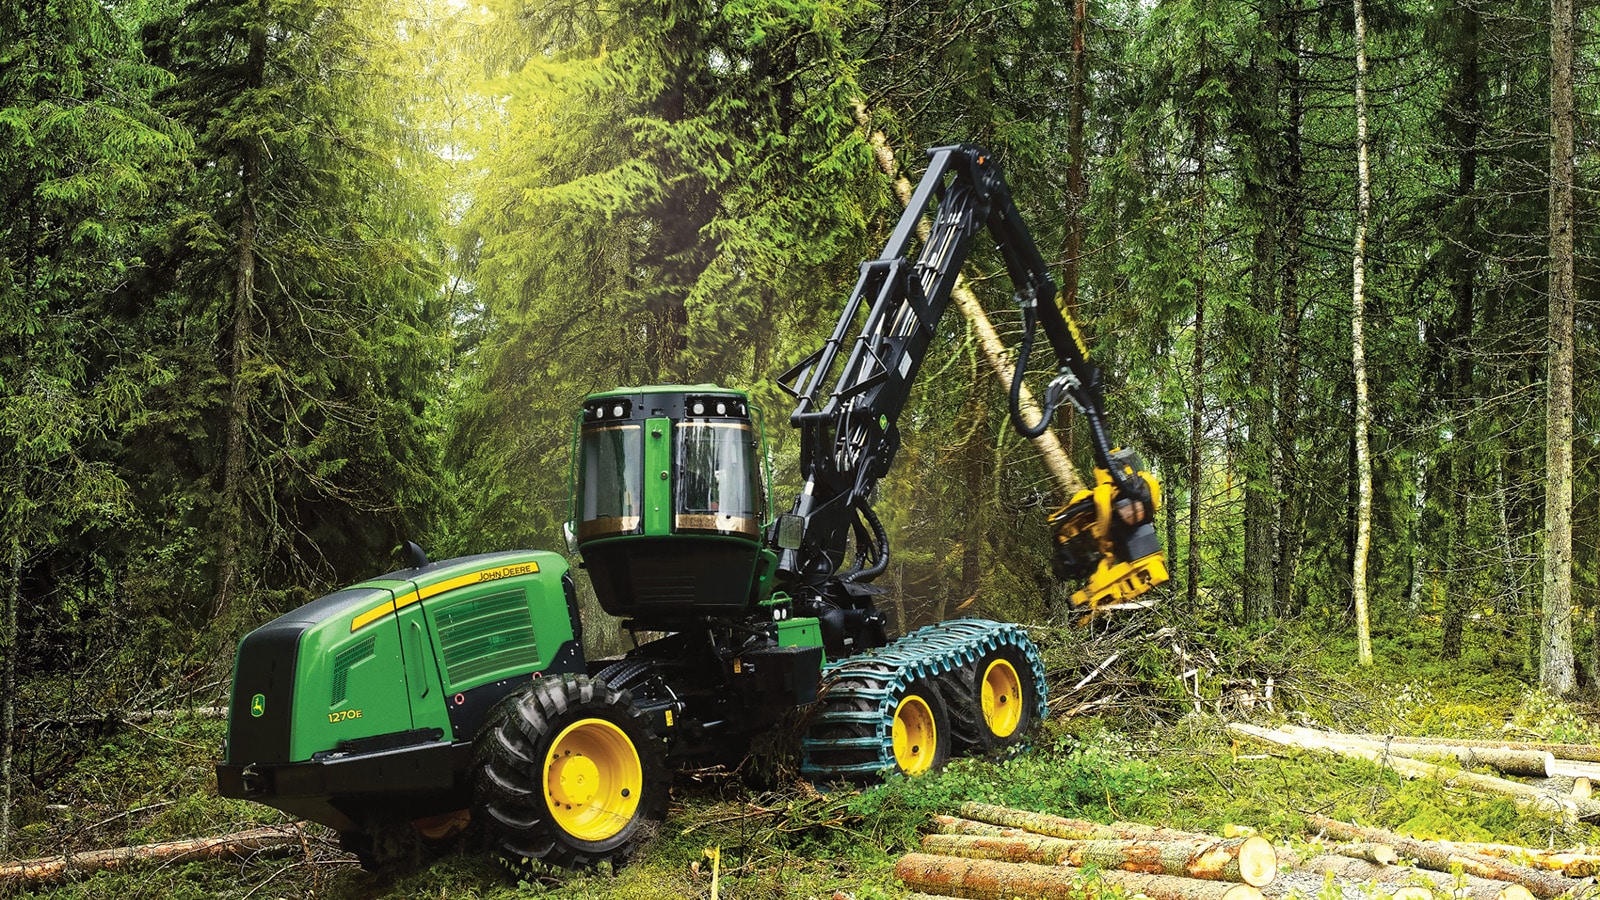 A 1270E wheeled harvester fells a pine tree in a forest